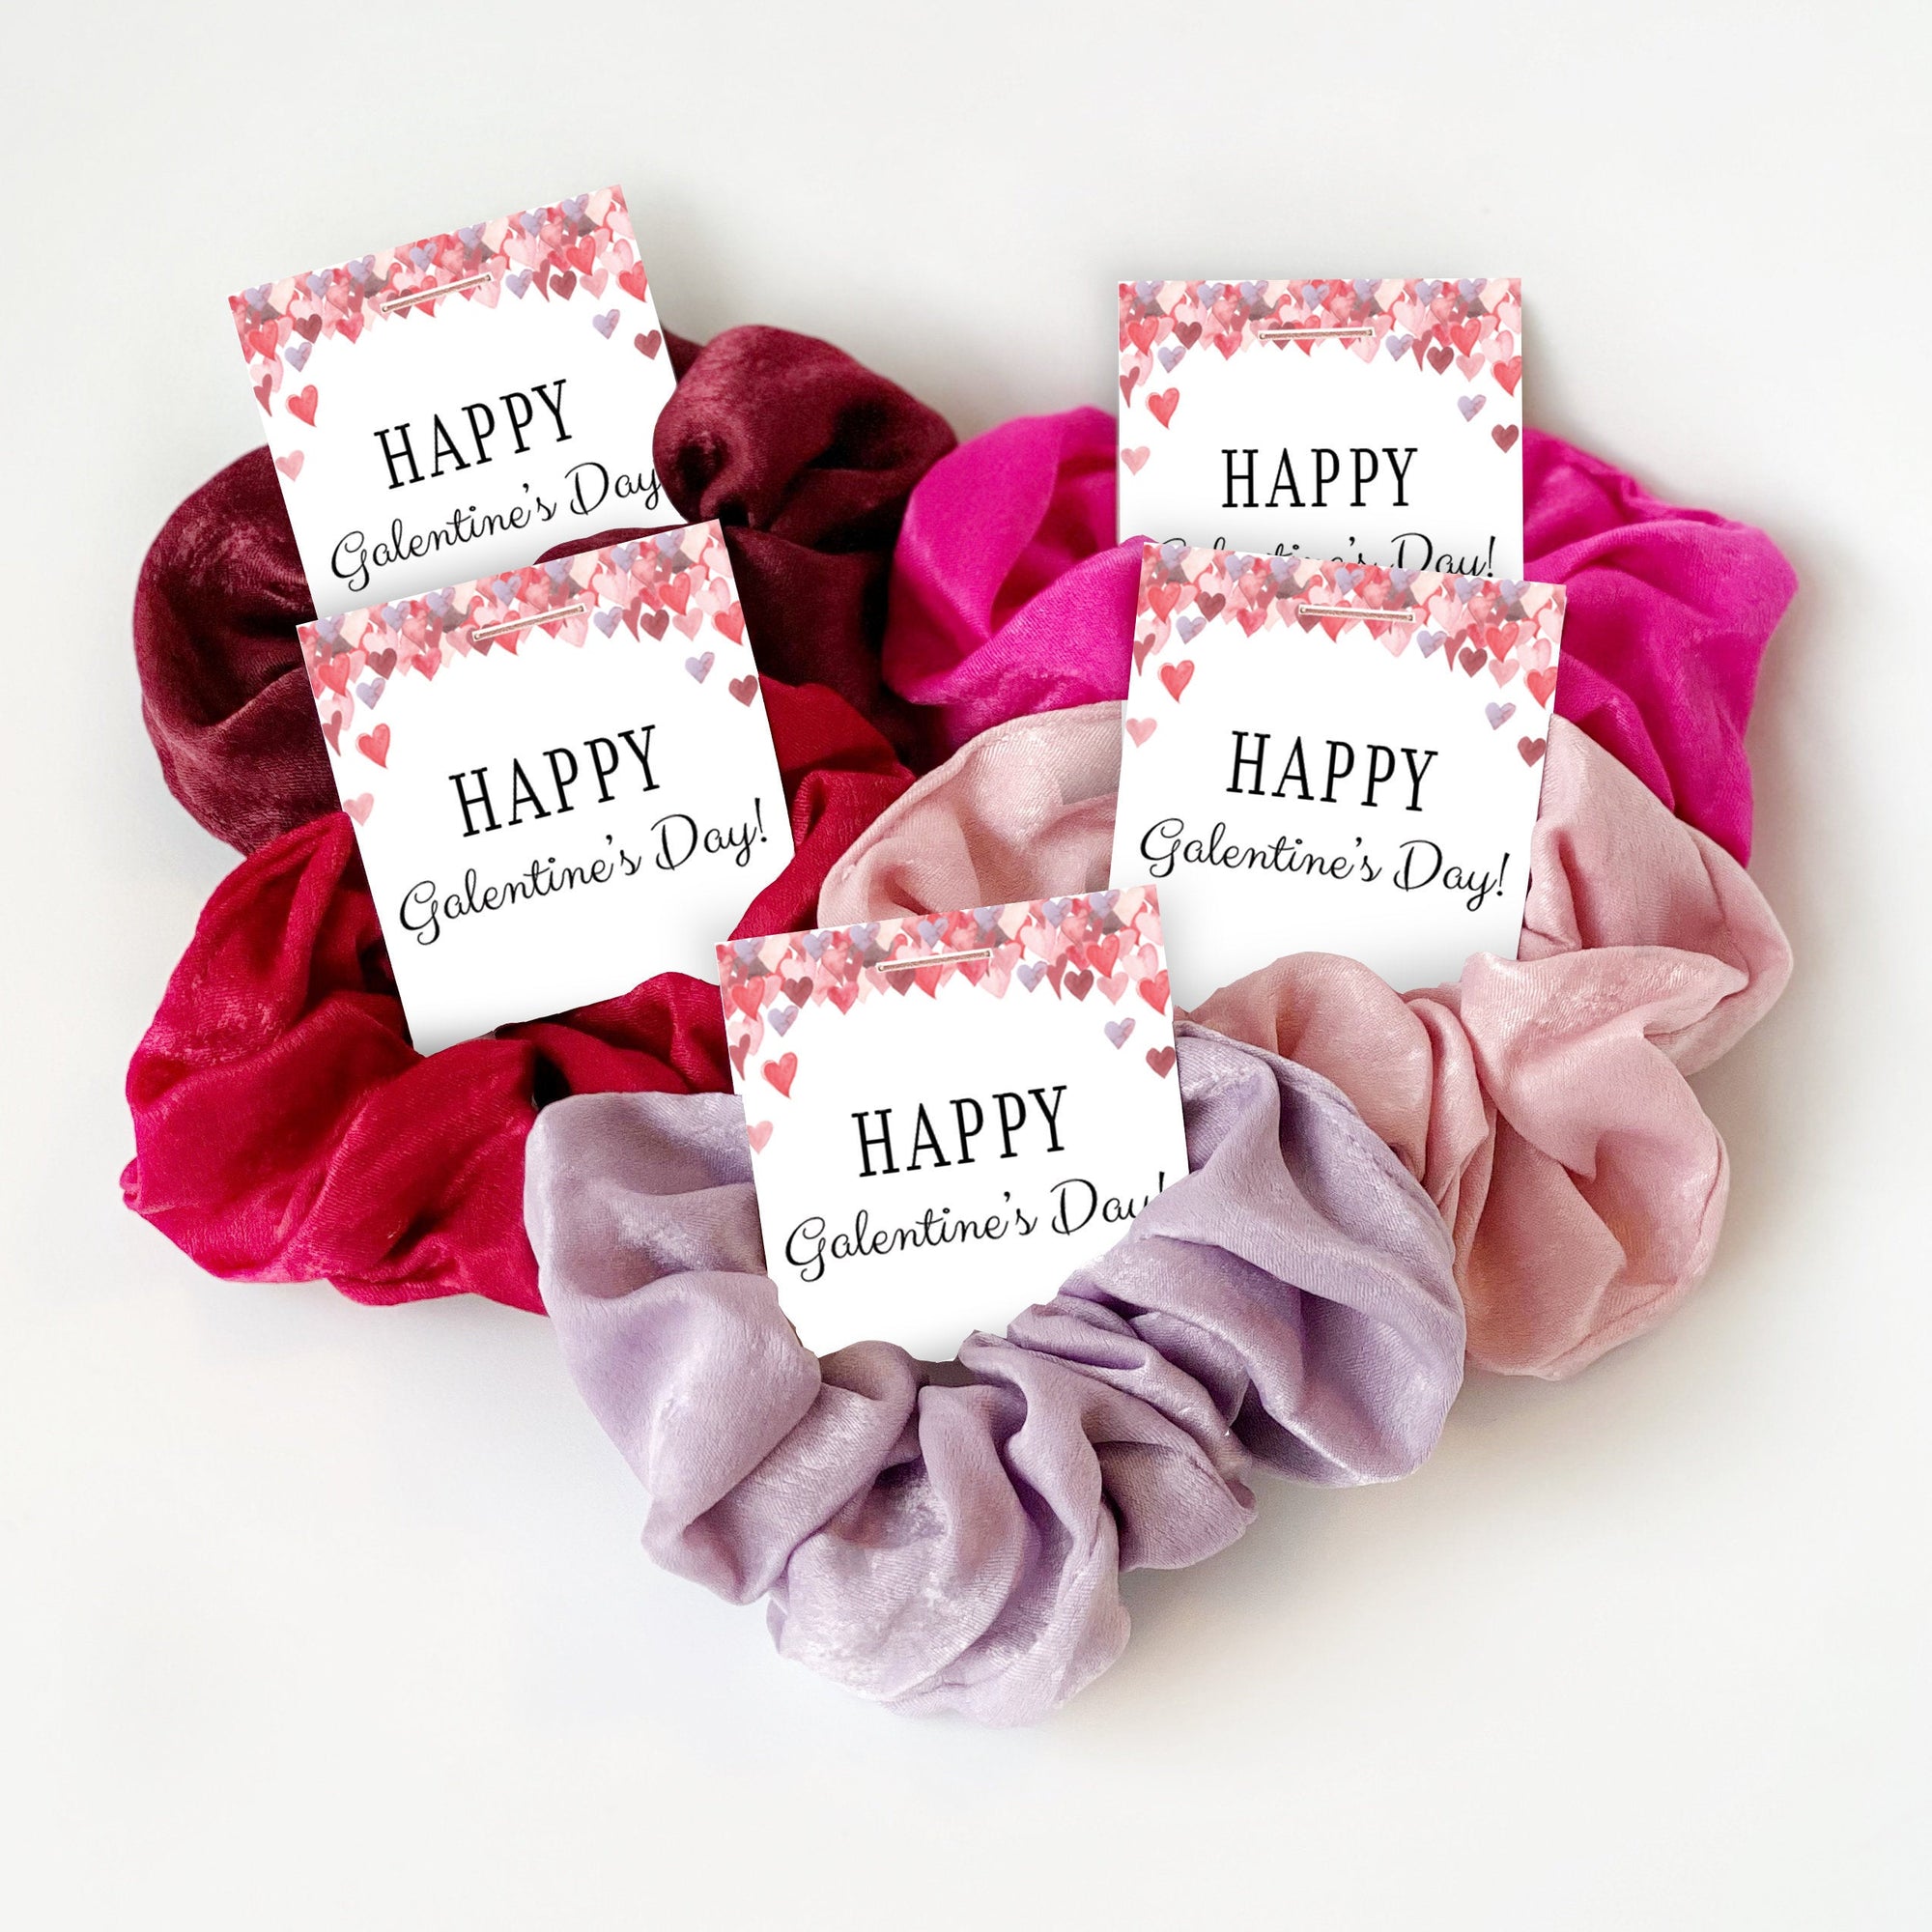 Happy Galentines Day Gift for Friends, Hair Scrunchies - PlumPolkaDot